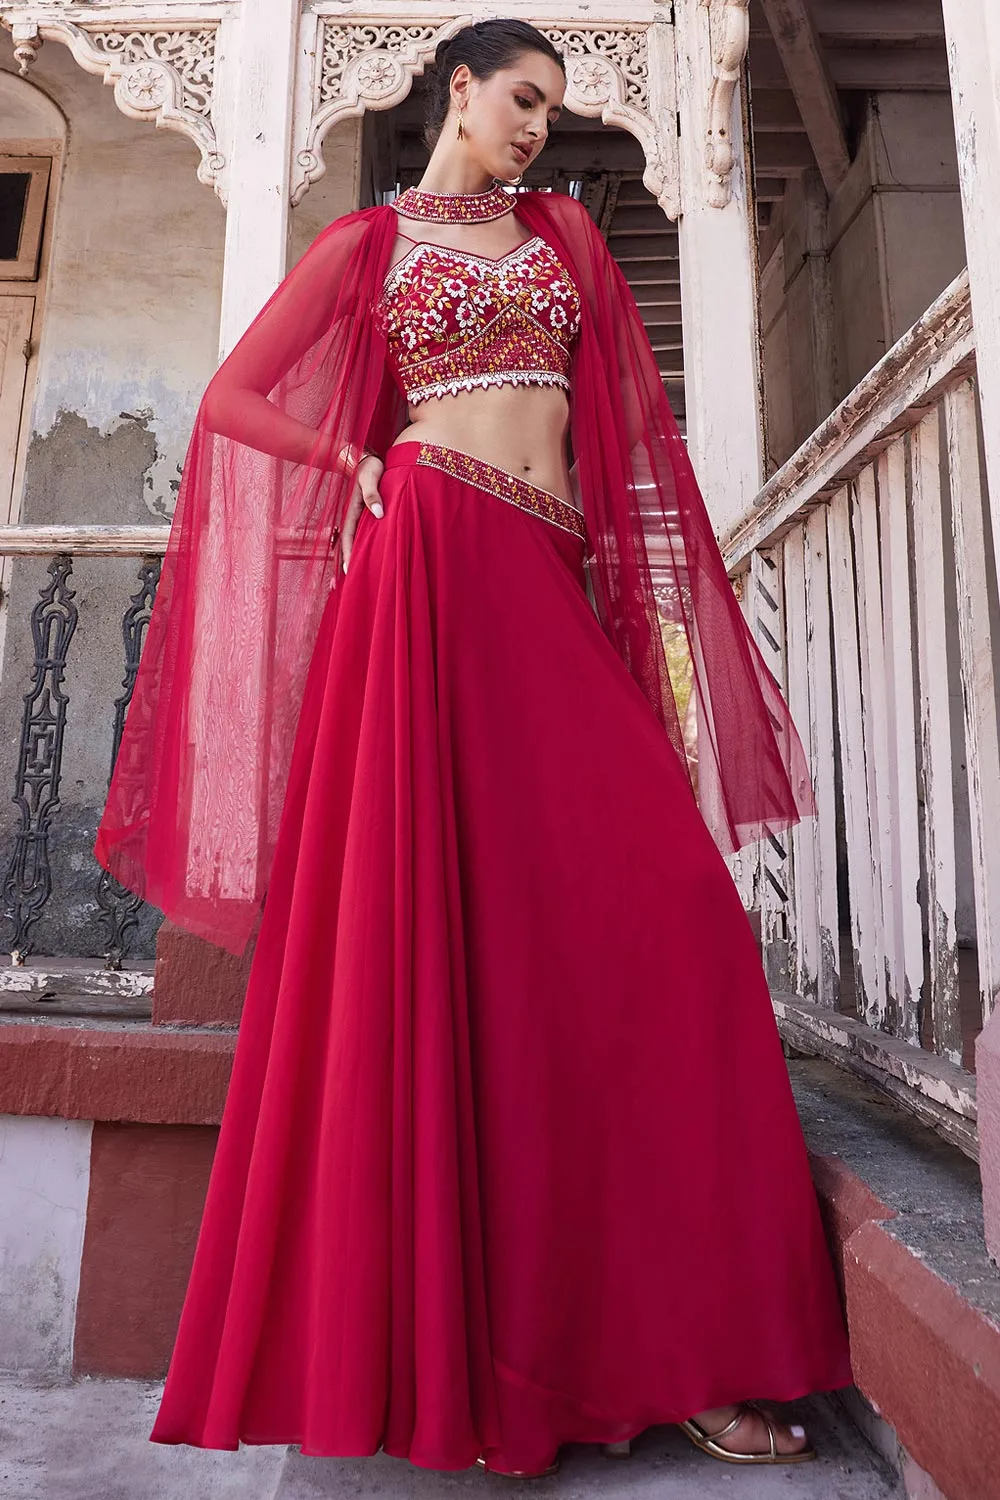 Fiery Elegance: The Embroidered Red Georgette Indo-Western Dress from Khaish